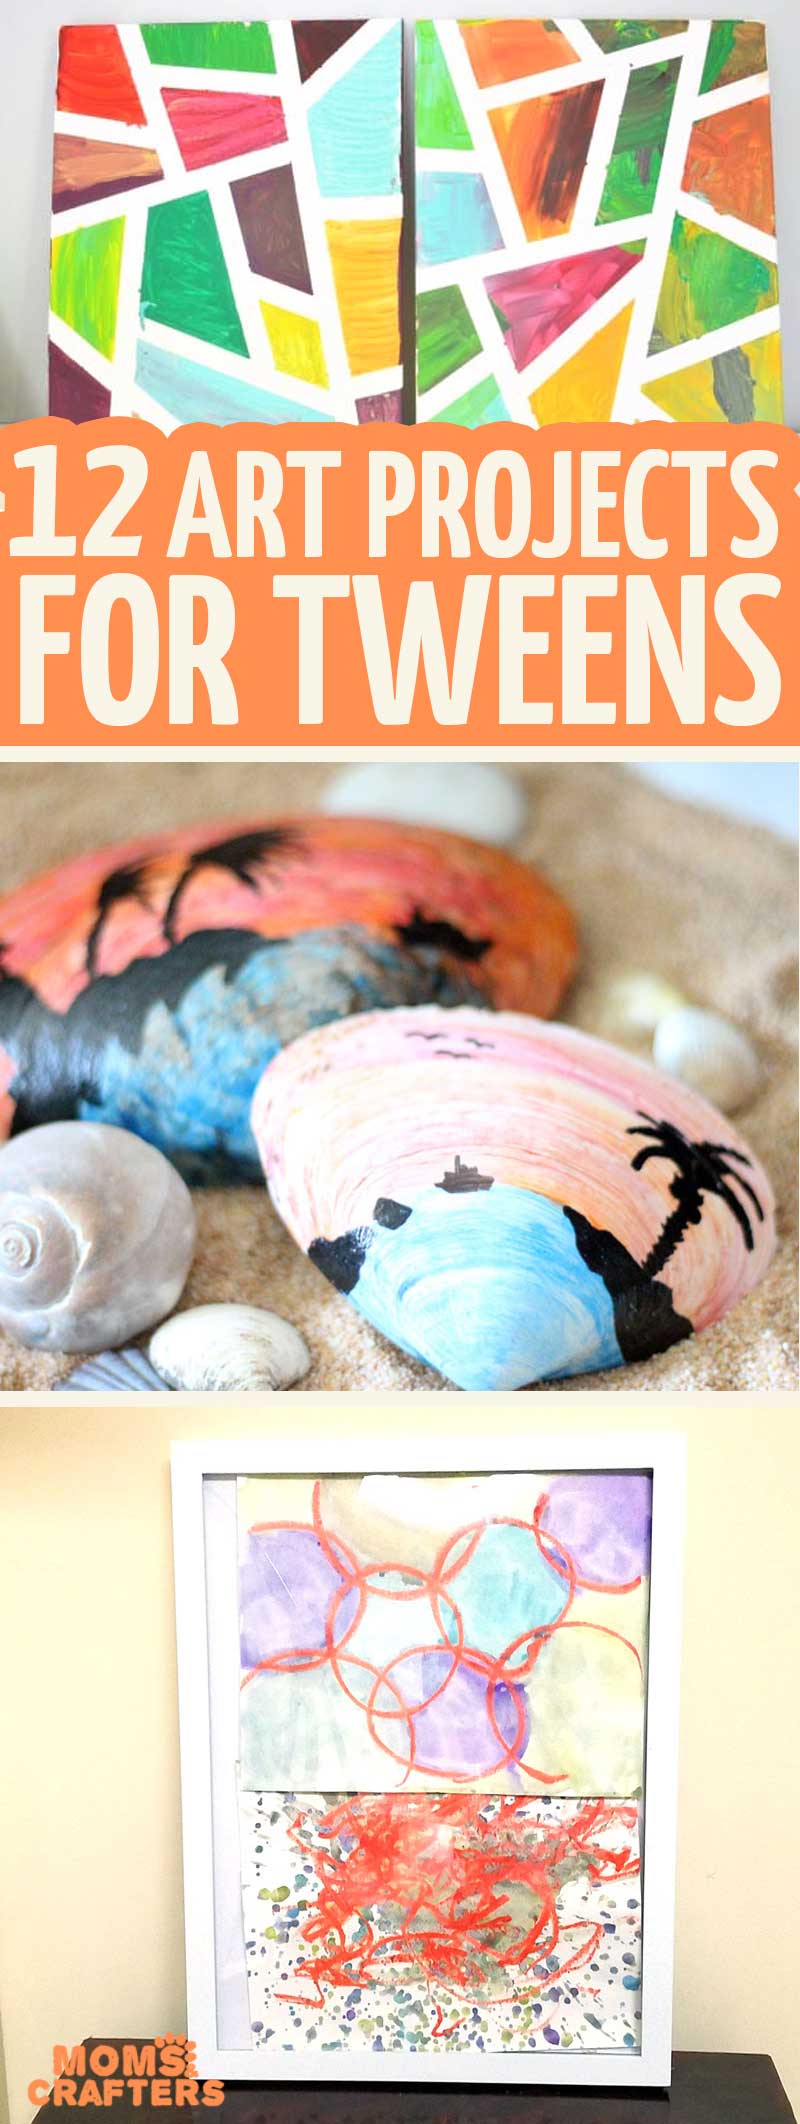 12 Art Projects for Tweens and Teens